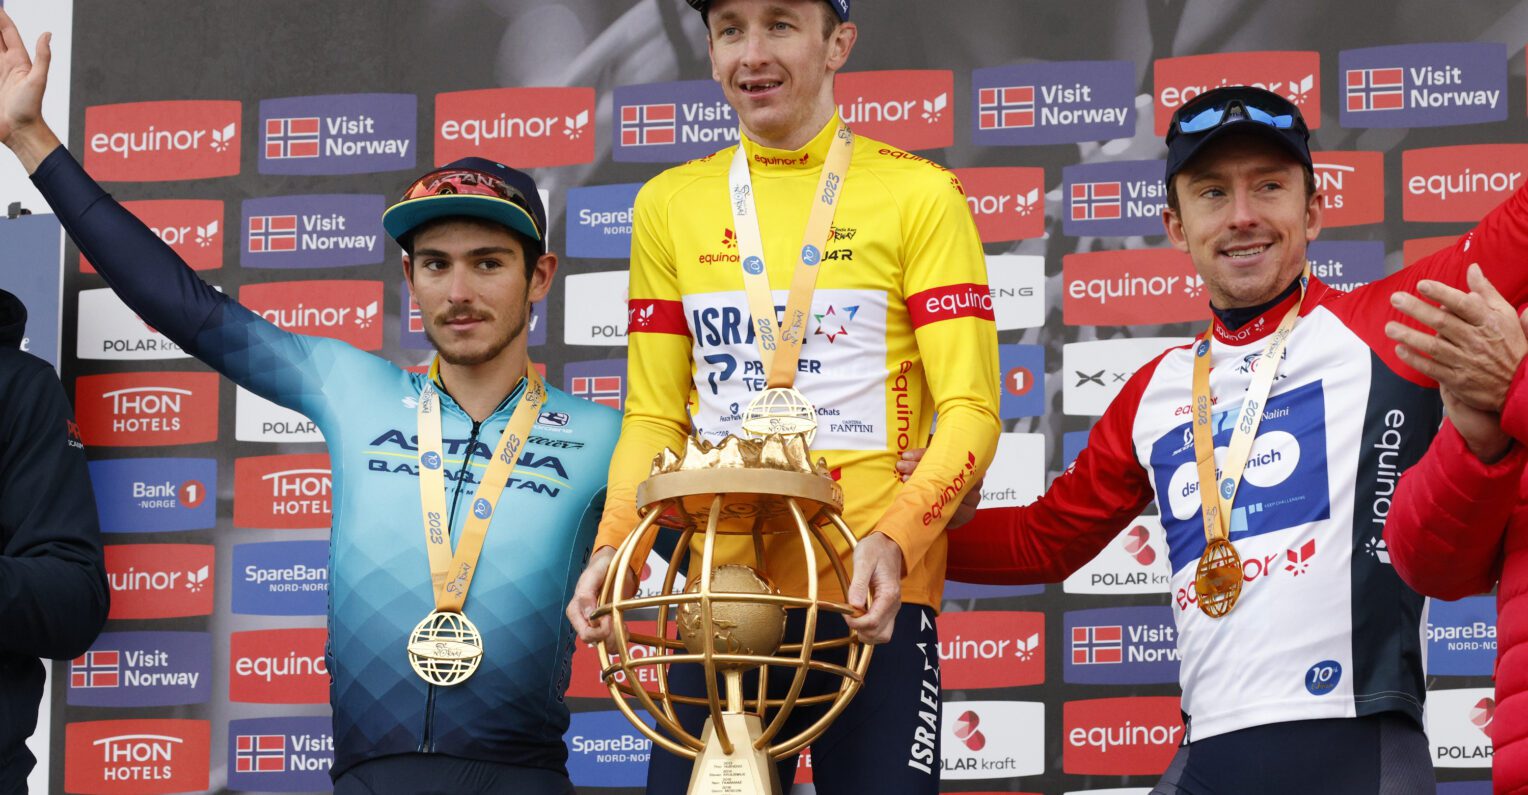 Stevie Williams on the podium after winning the Arctic Tour of Norway 2023